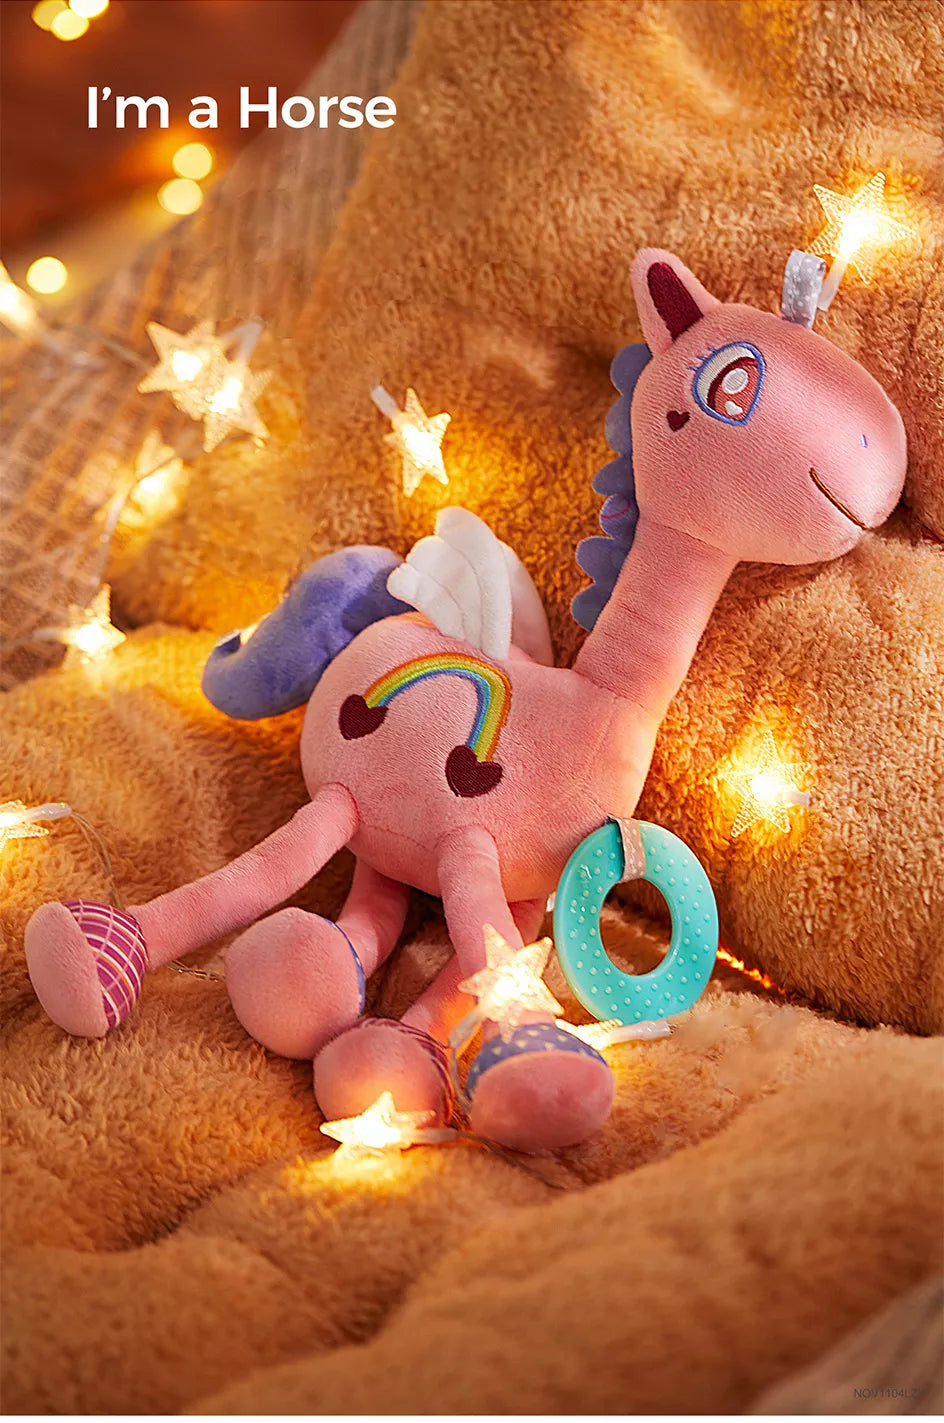 Baby girl_s crib horse plush and rattle